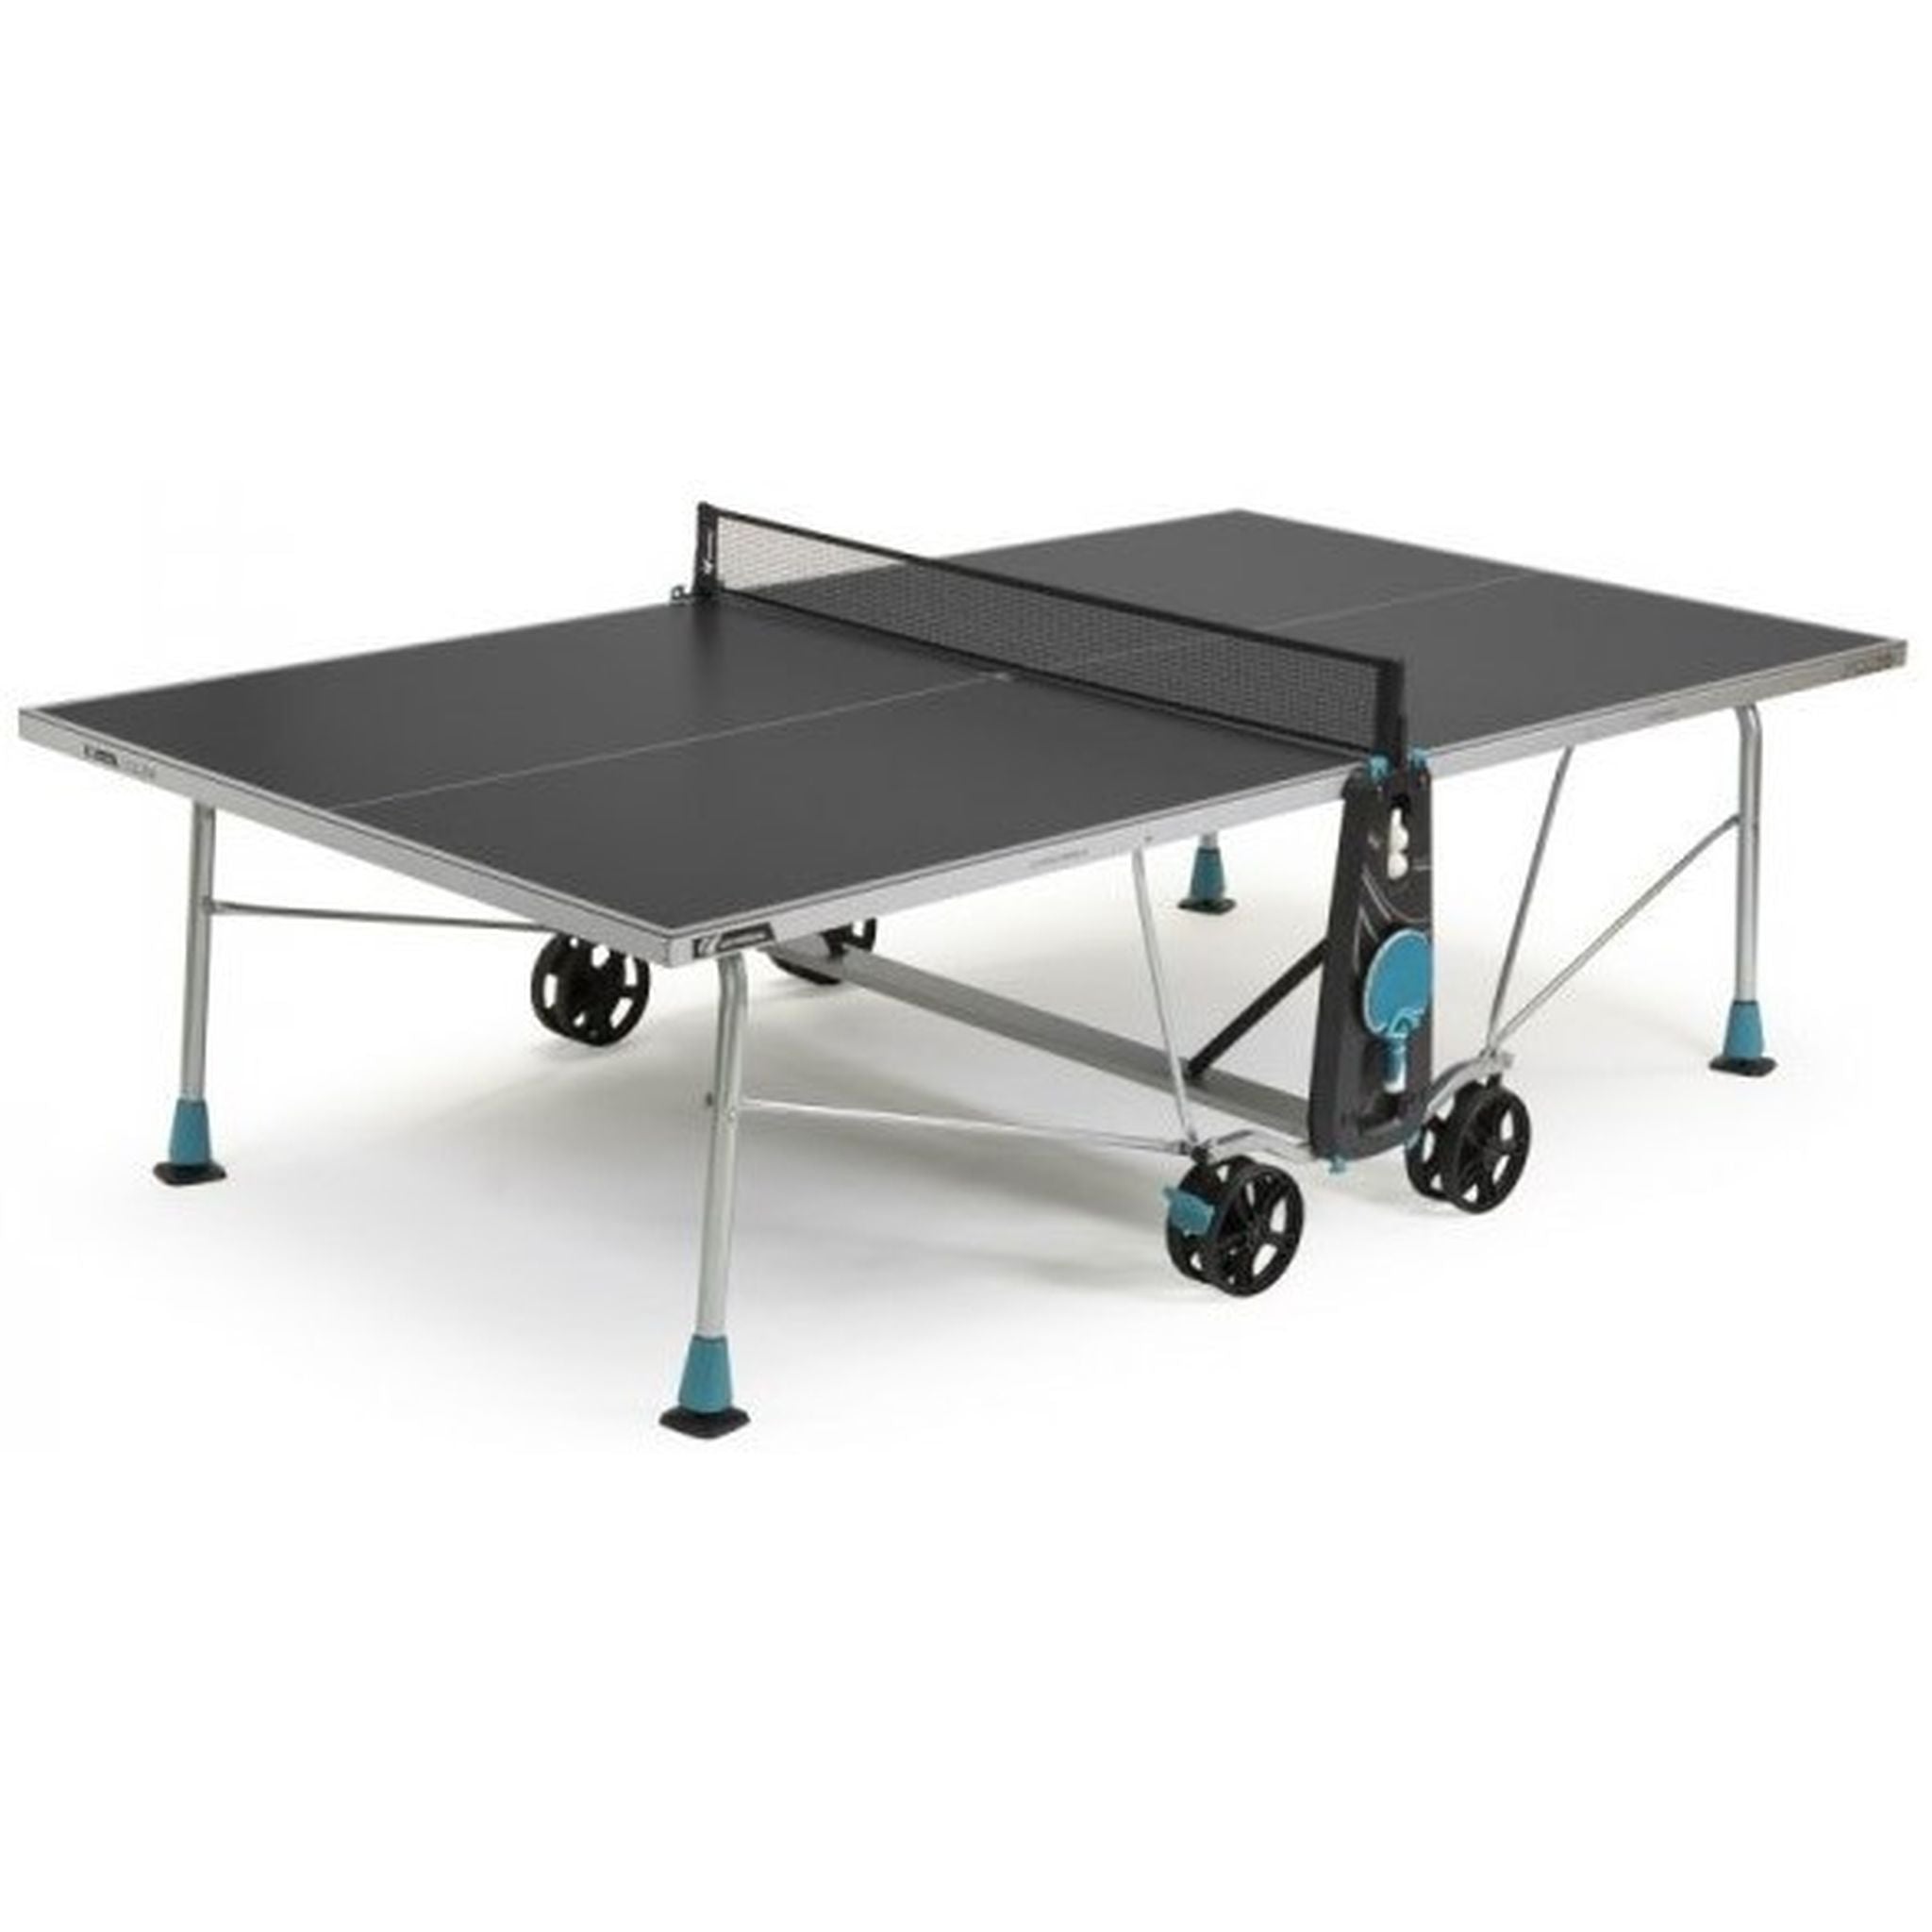 Cornilleau 200X Outdoor Table Tennis Table